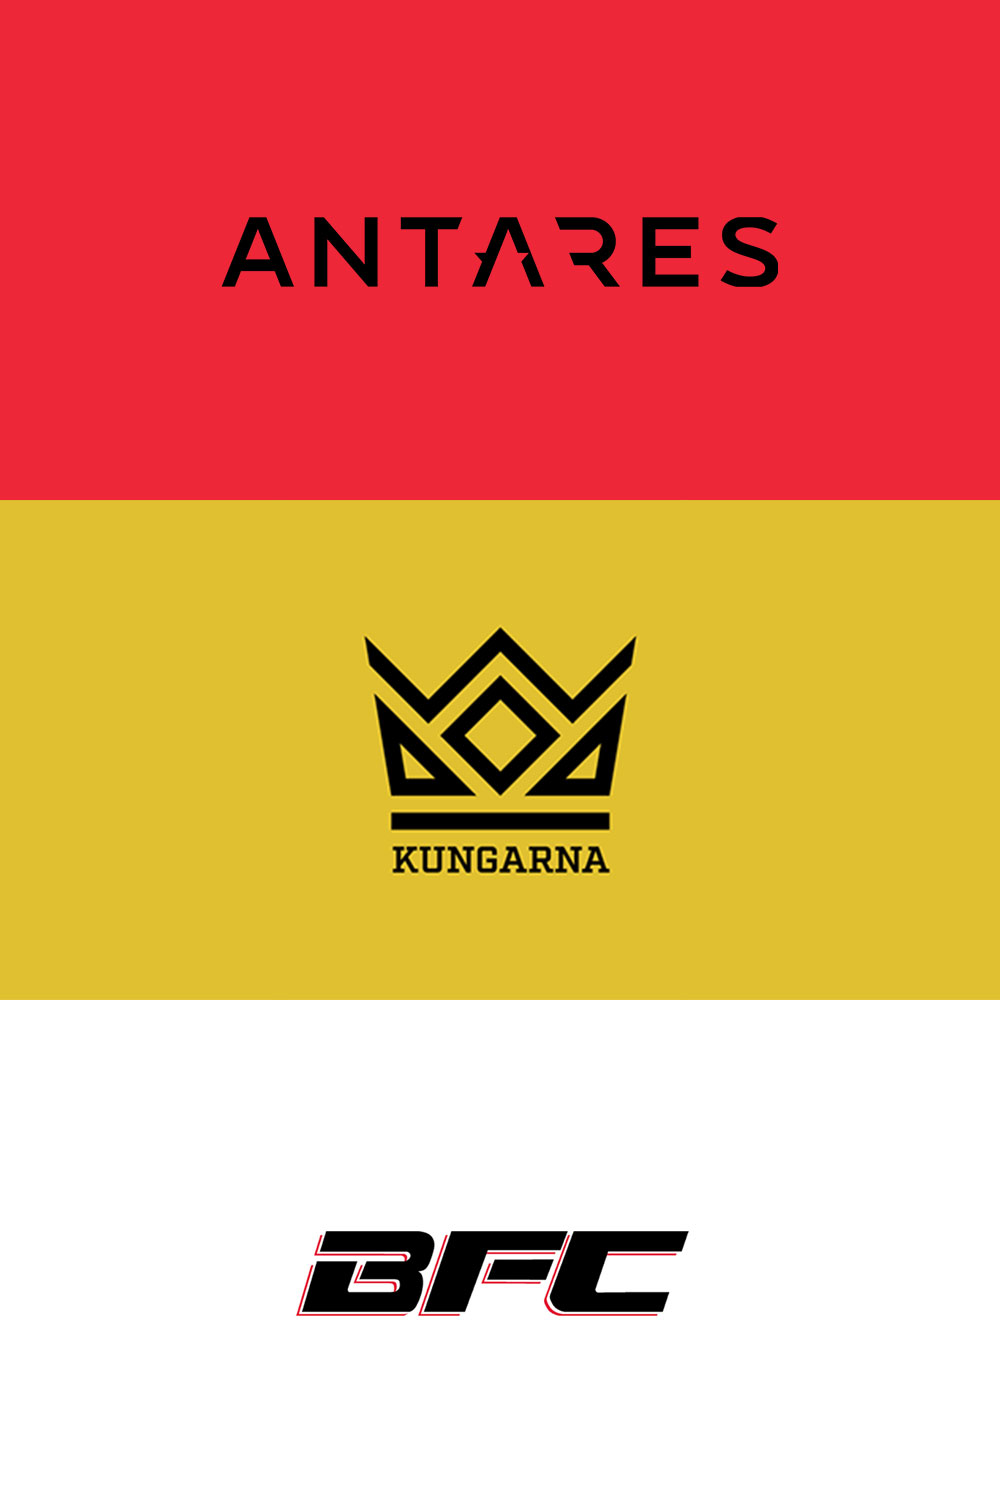 Antares Gaming and Kungarna Complete Merger to Unify the Worlds of Pop Culture and Gaming